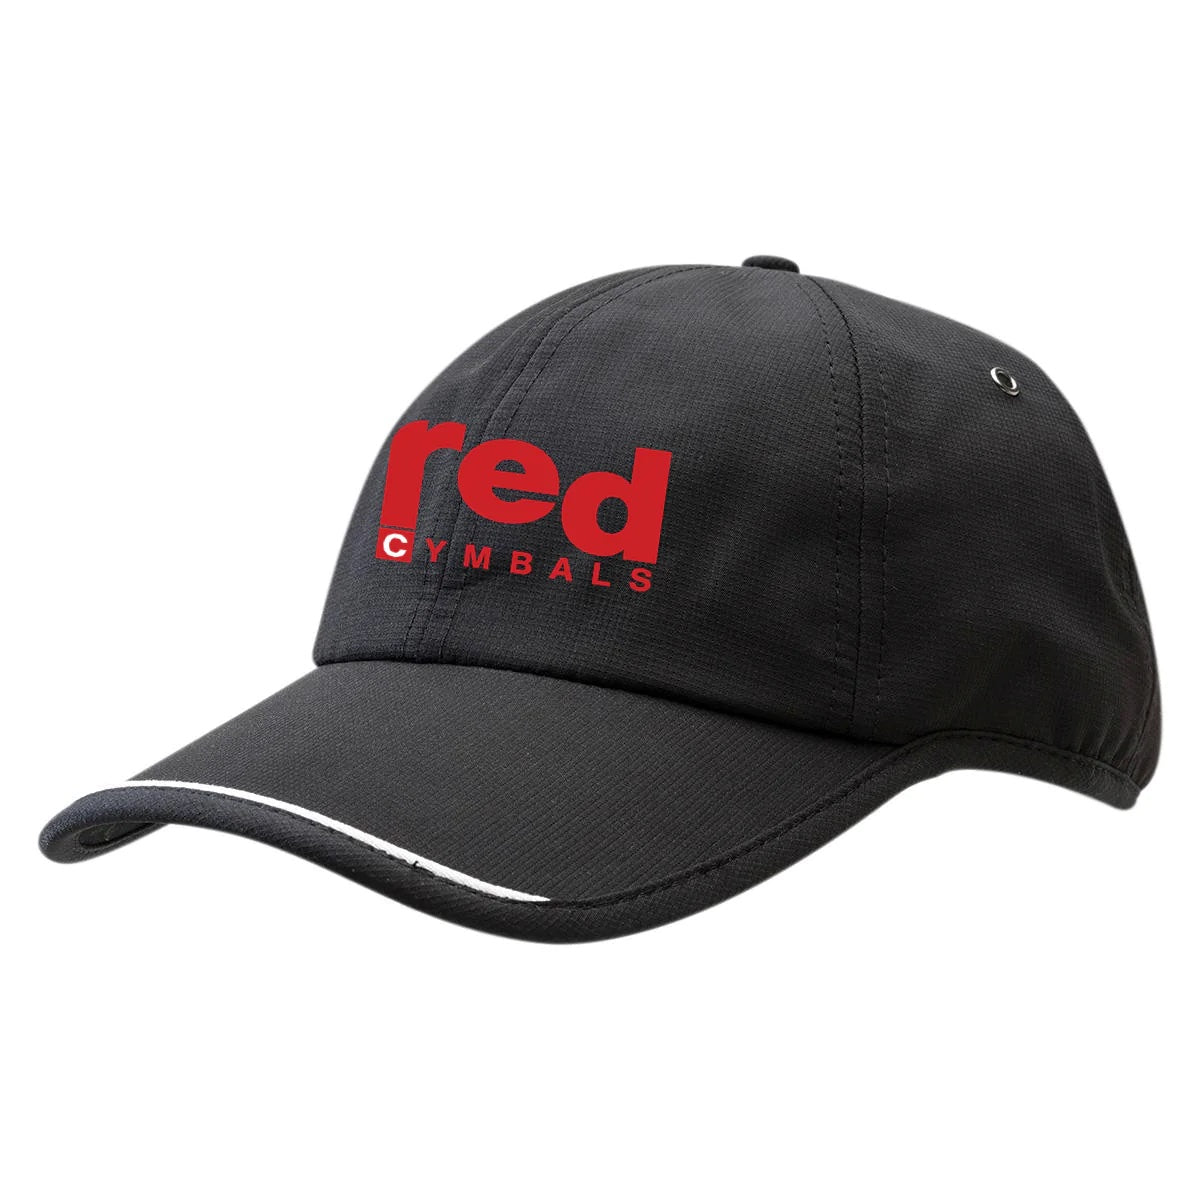 Red Cymbals Hats & Beanies - Red For Your Head - Made in Australia